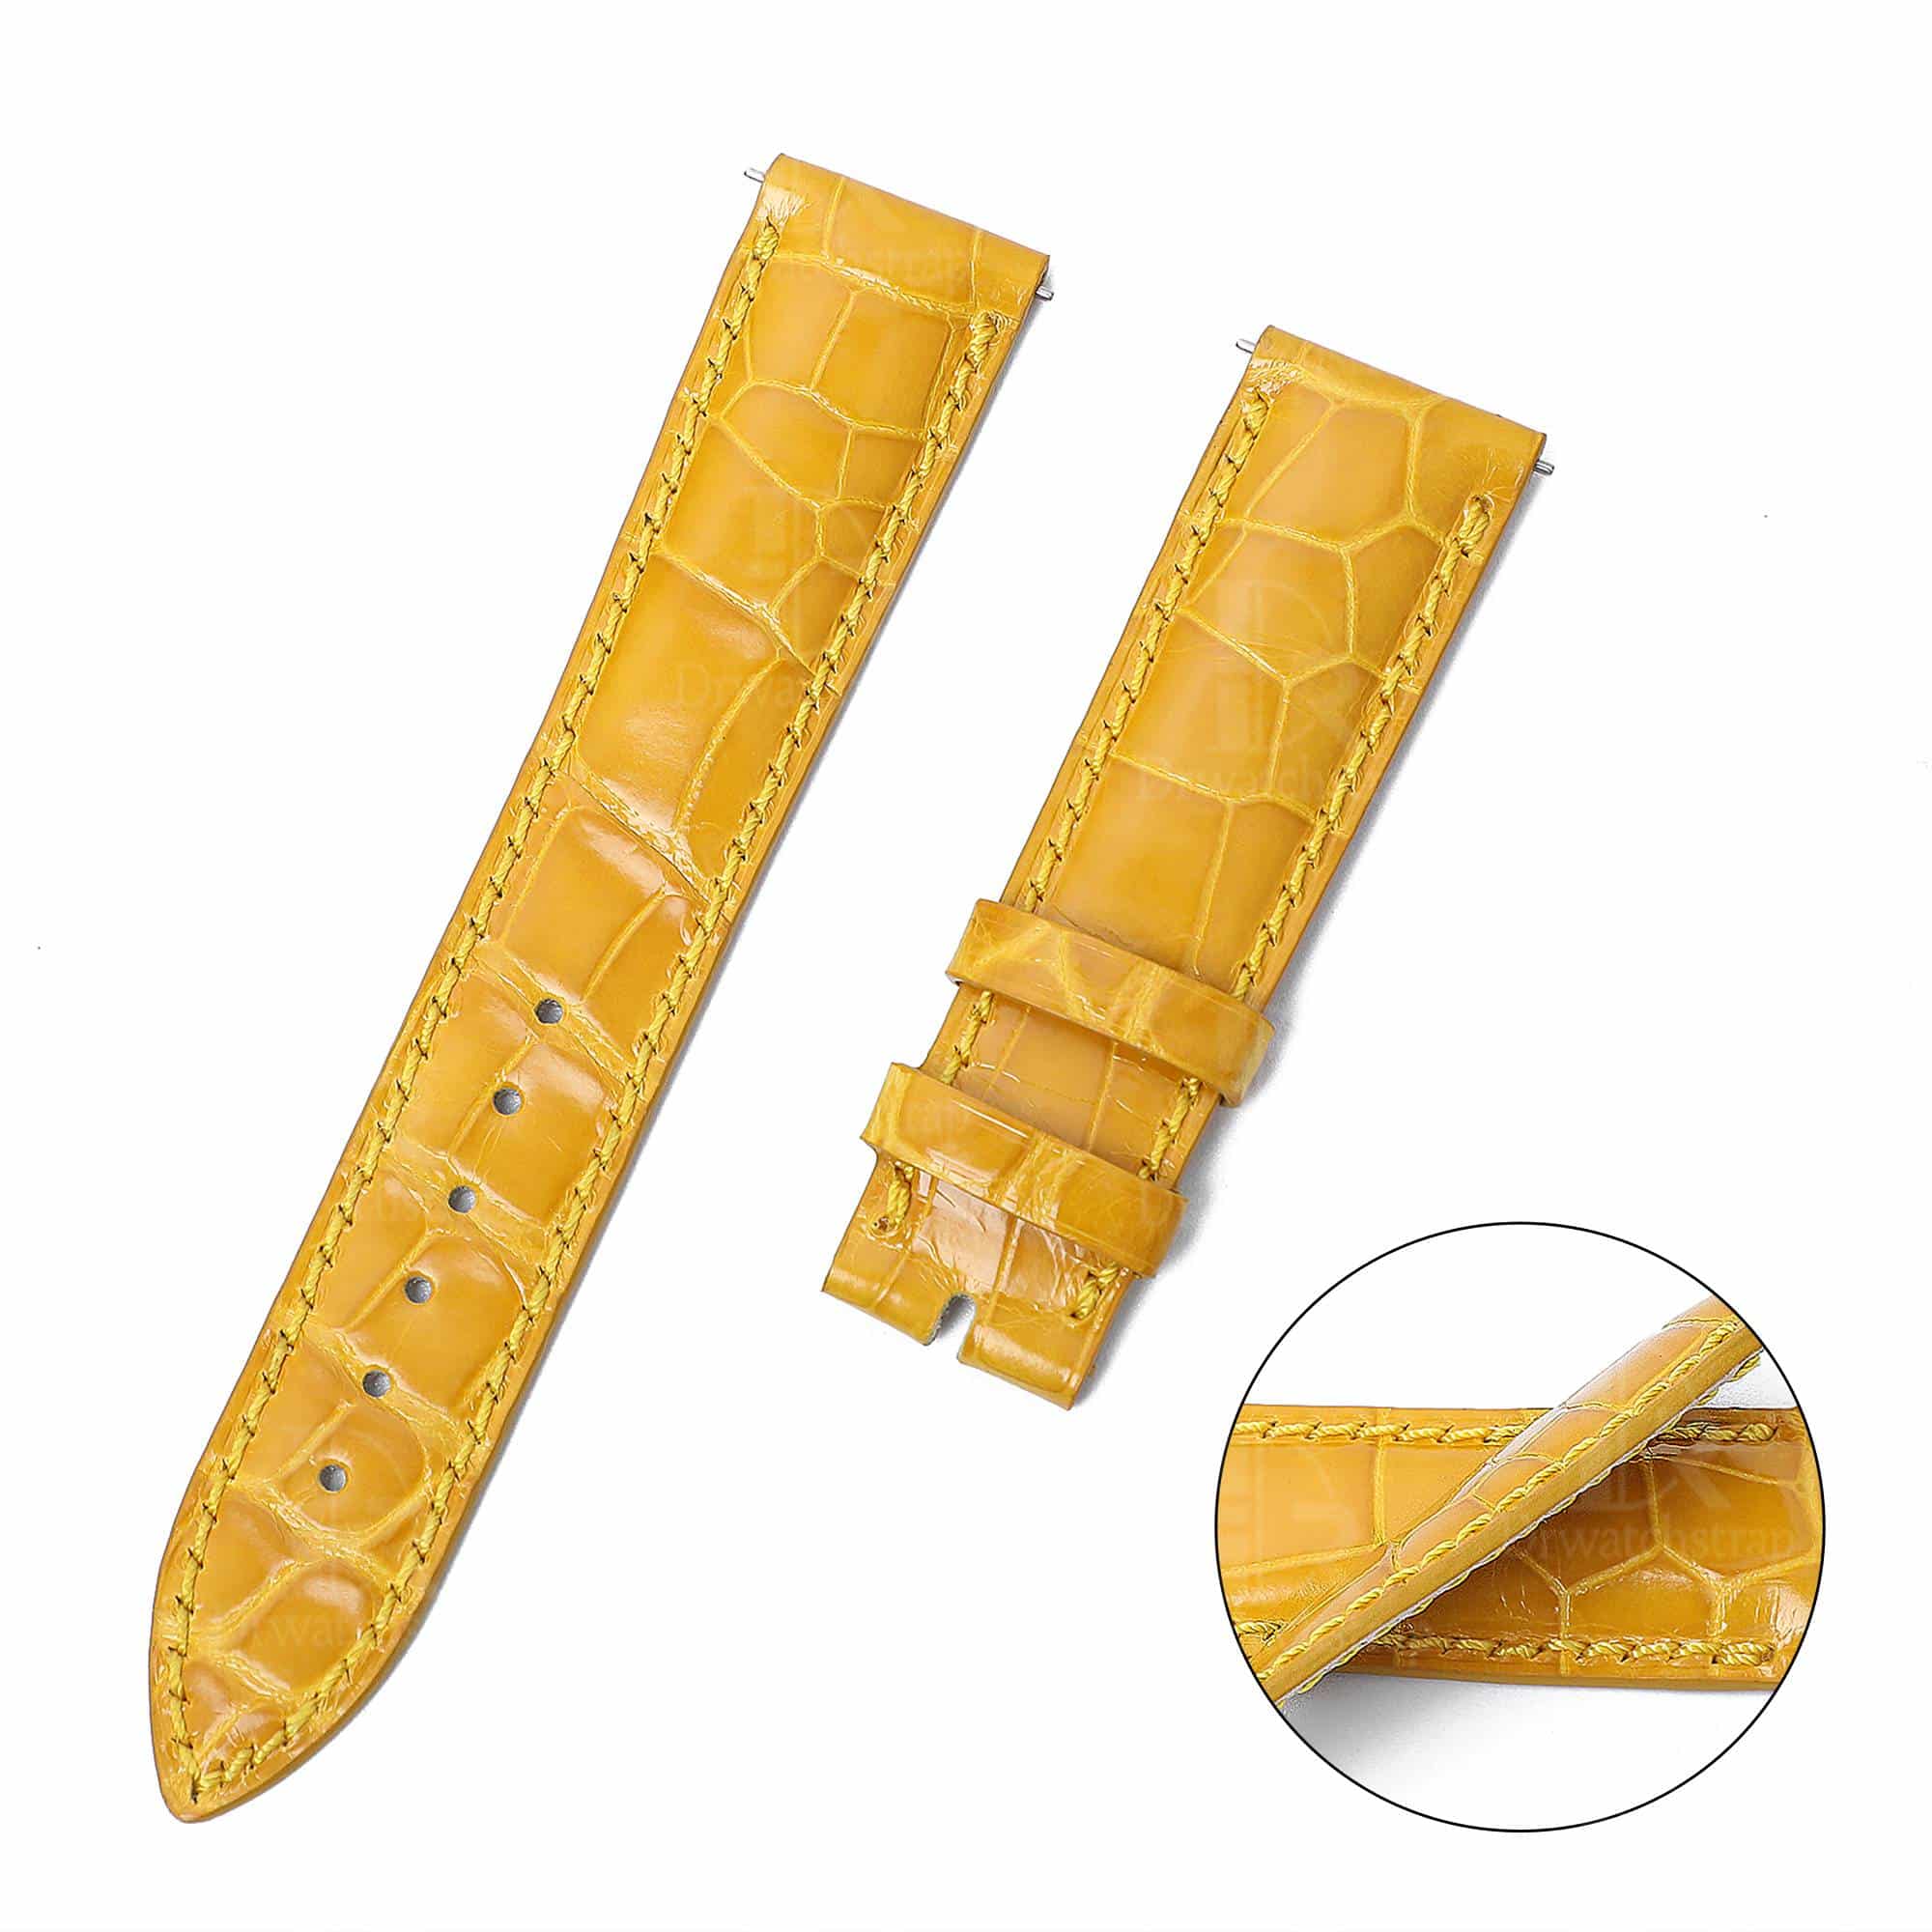 Handmade replacement Yellow Leather watch strap for Franck Muller Crazy Hour diamond watch